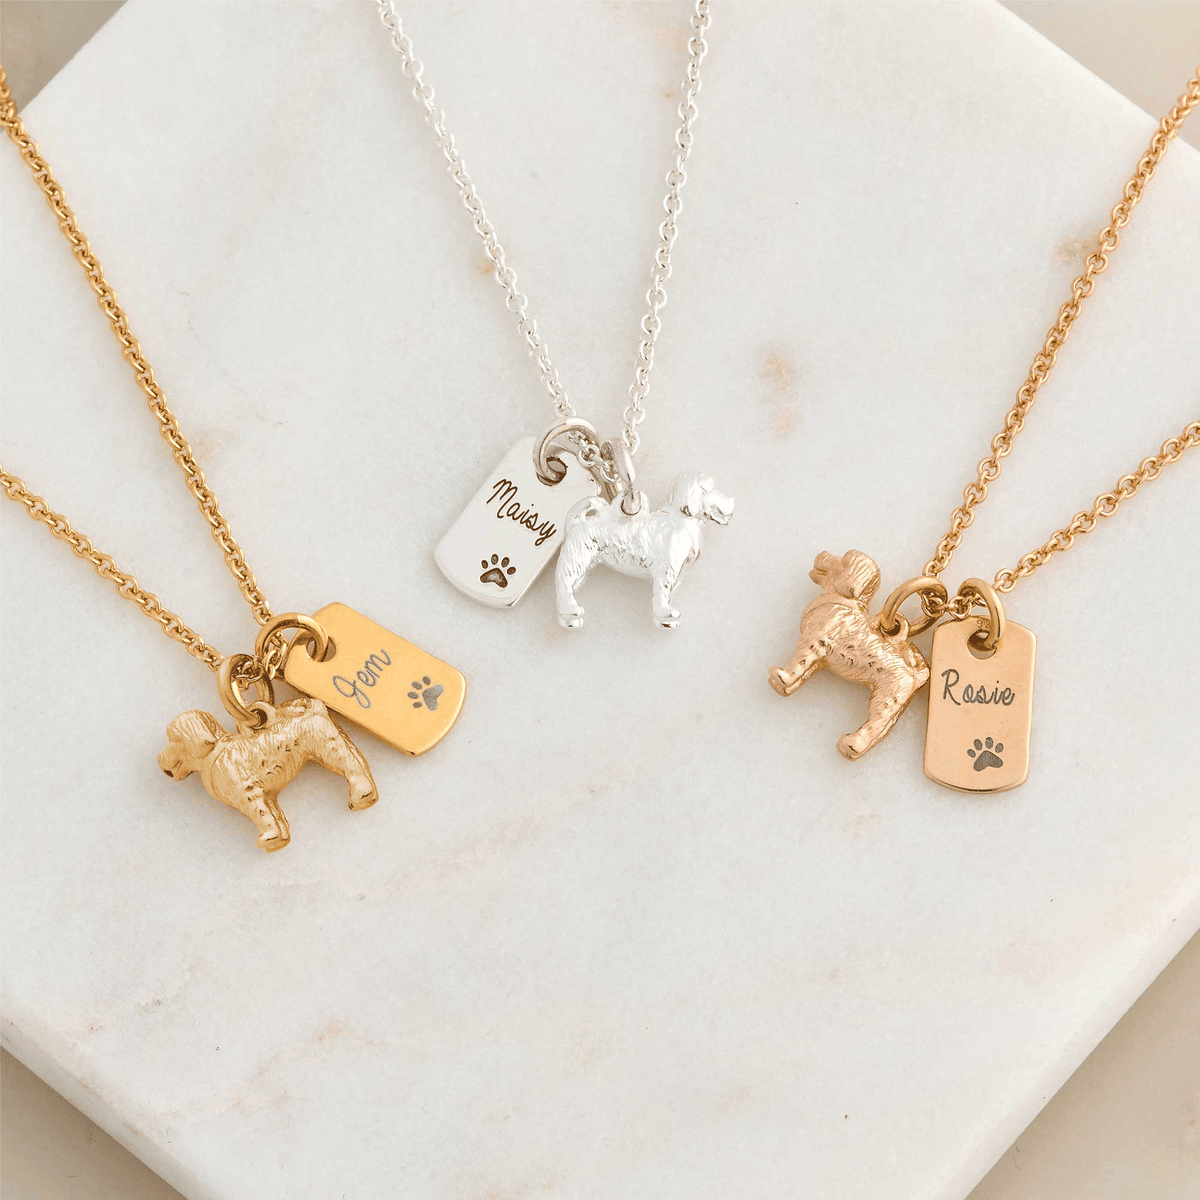 gift for dog lover cockerpoo necklace with engraved name